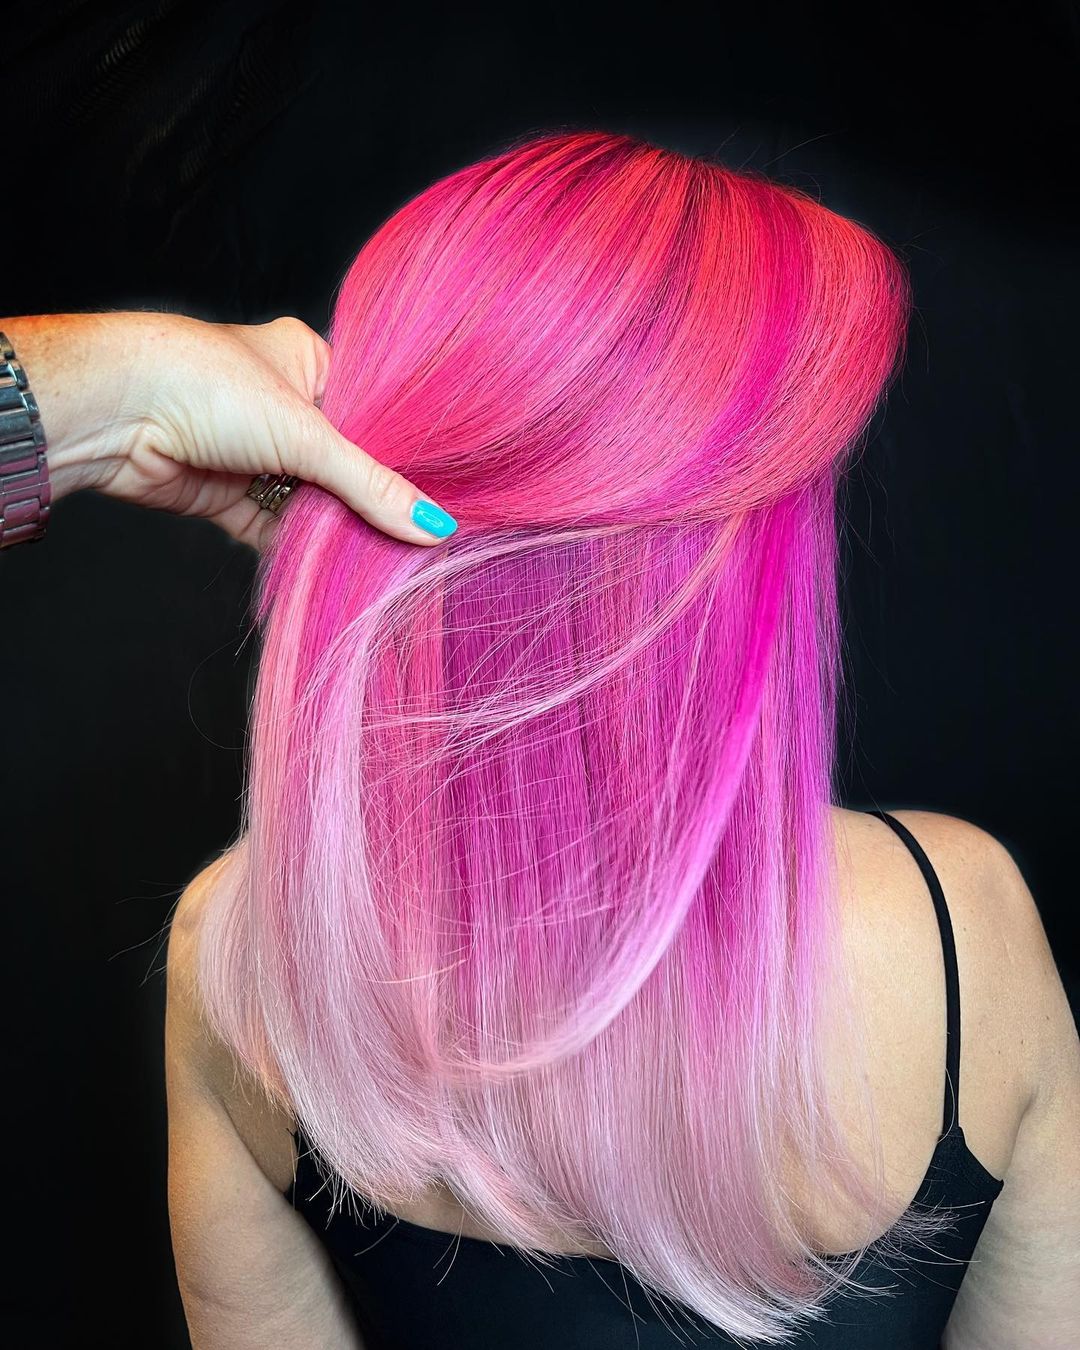 100+ Best Colorful Hair Ideas images 63